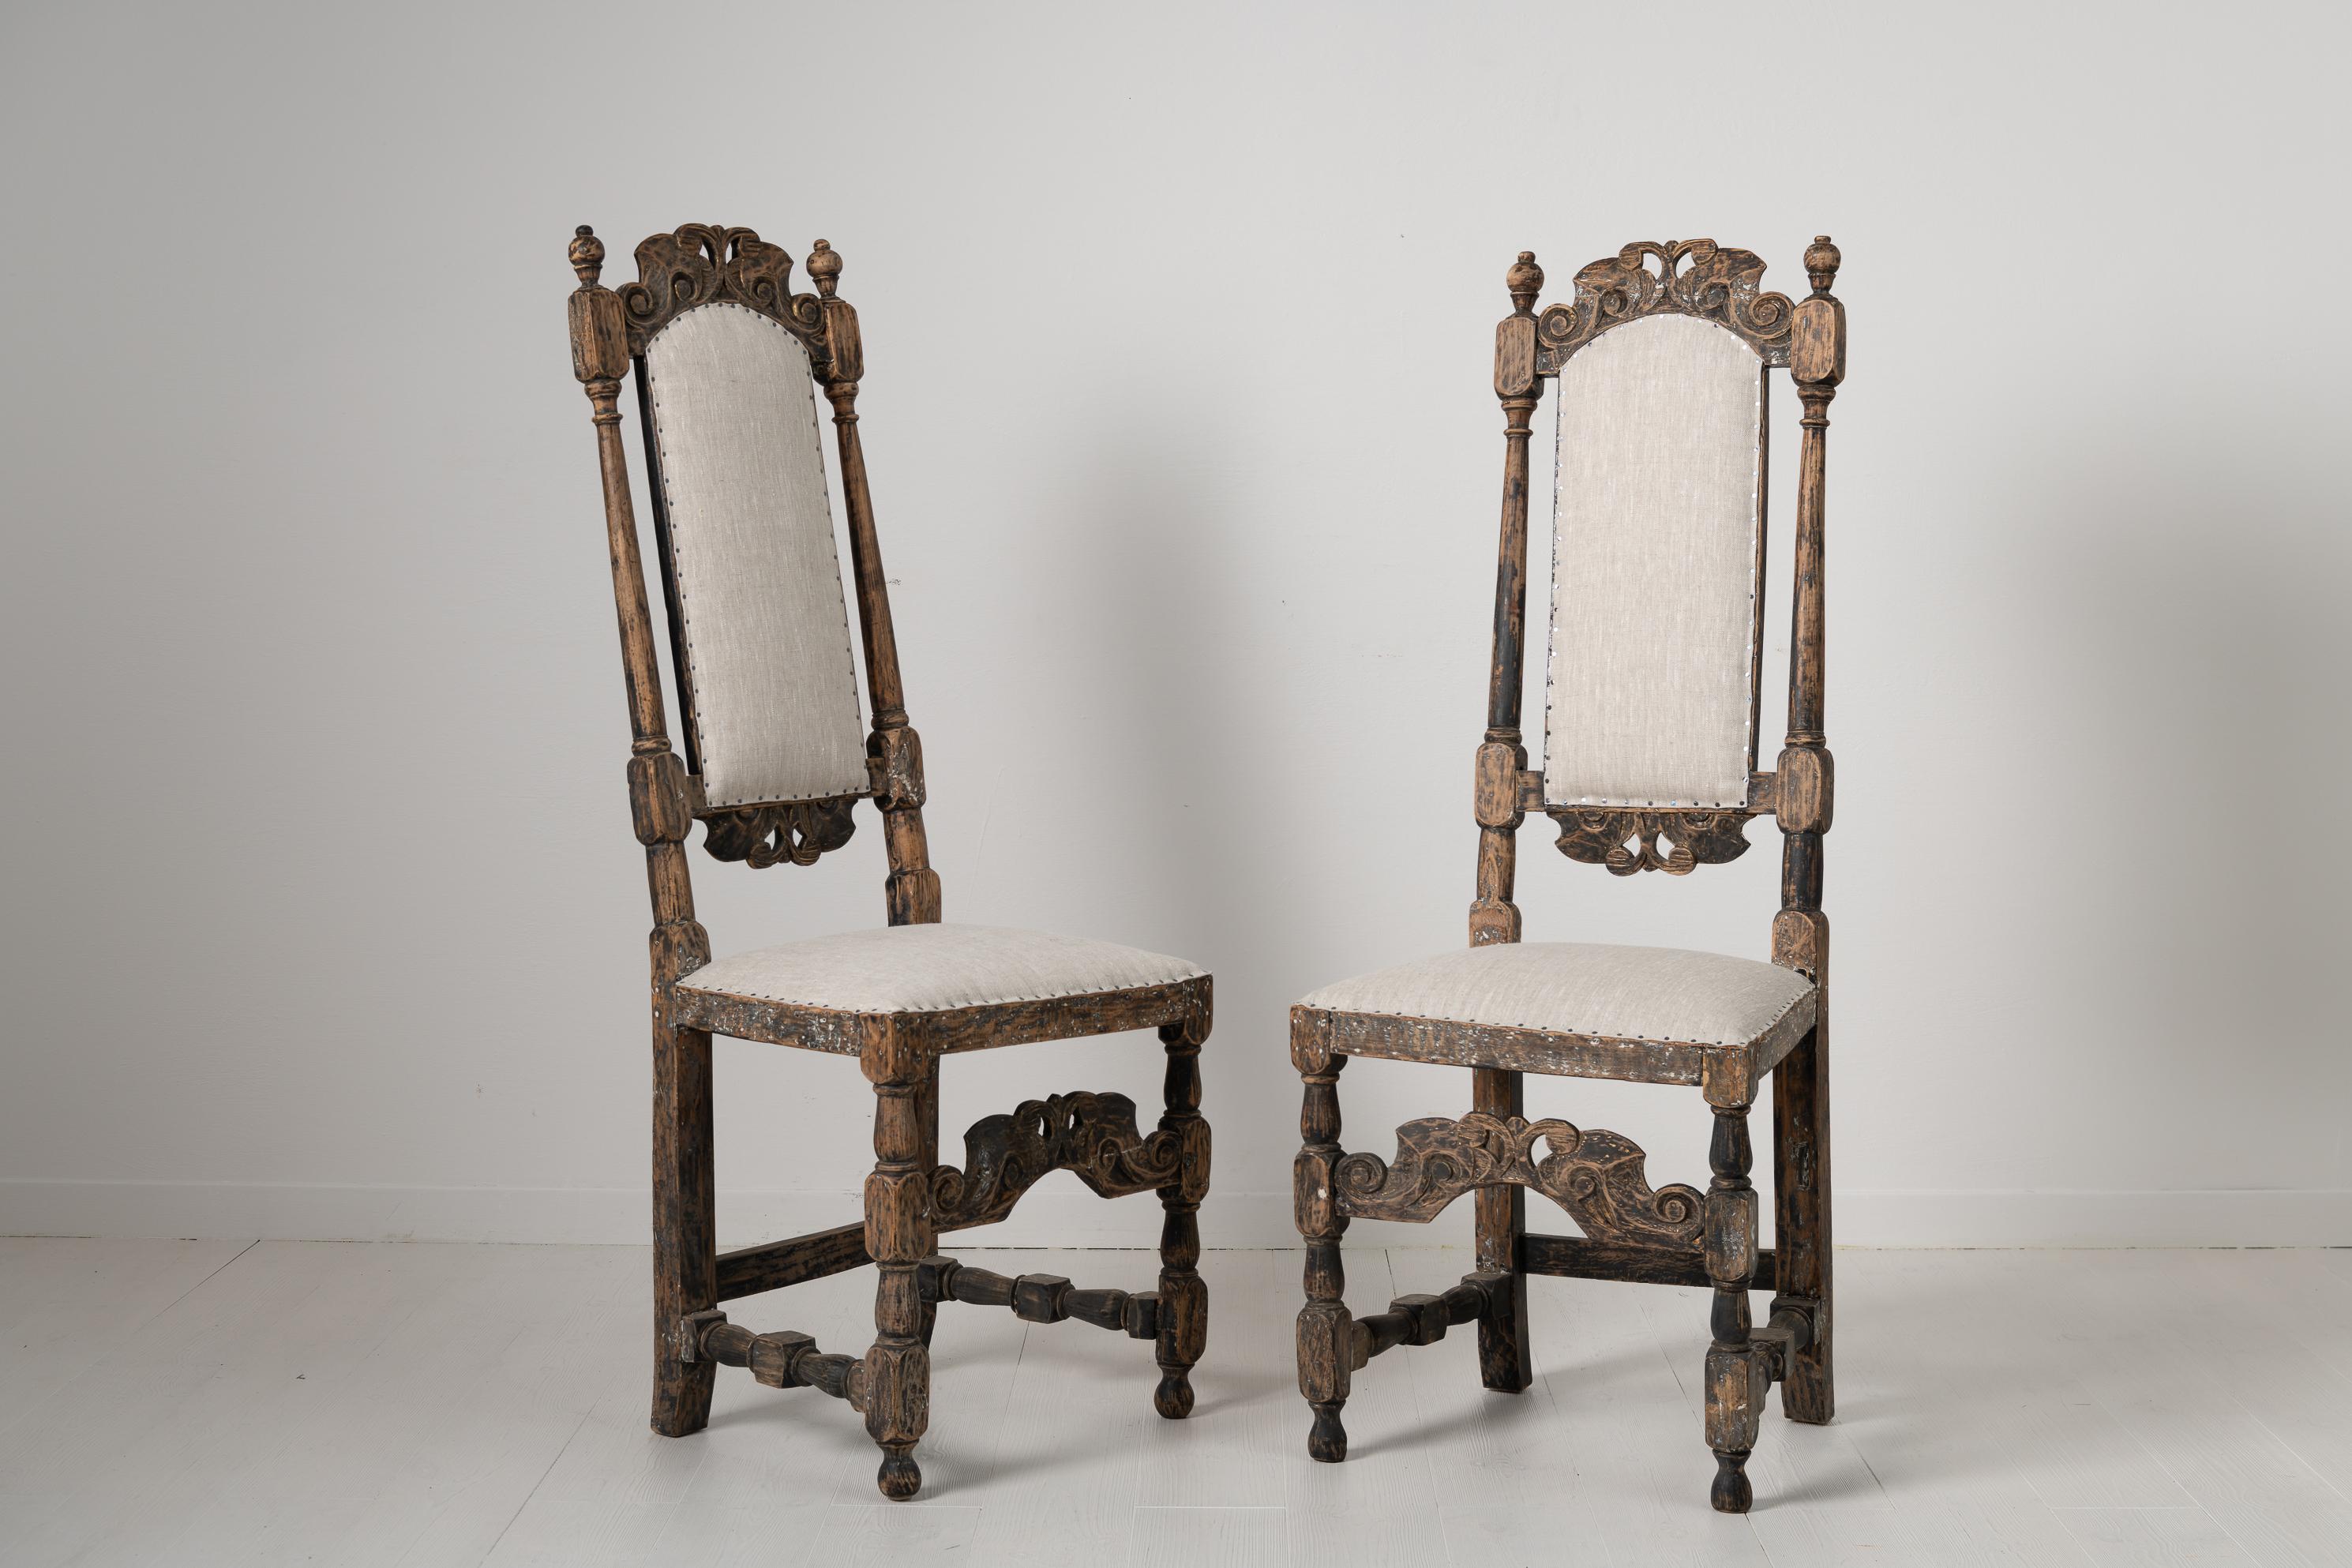 Hand-Crafted Mid 18th Century Pair of Swedish Baroque Chairs